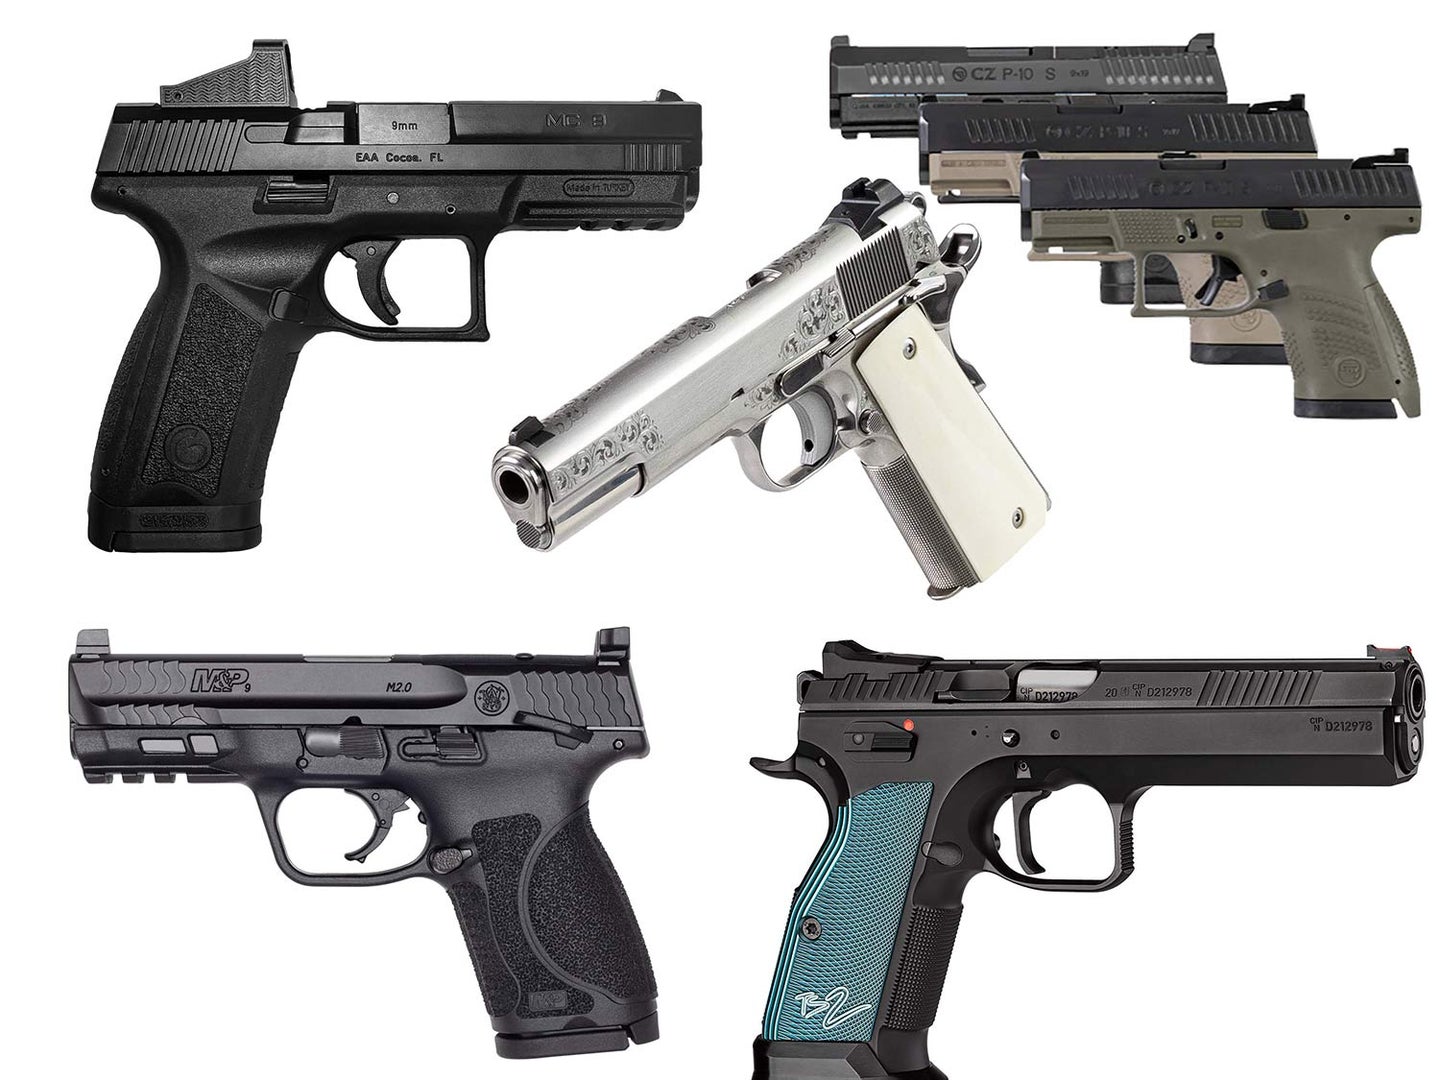 A collage of handguns on a white background.